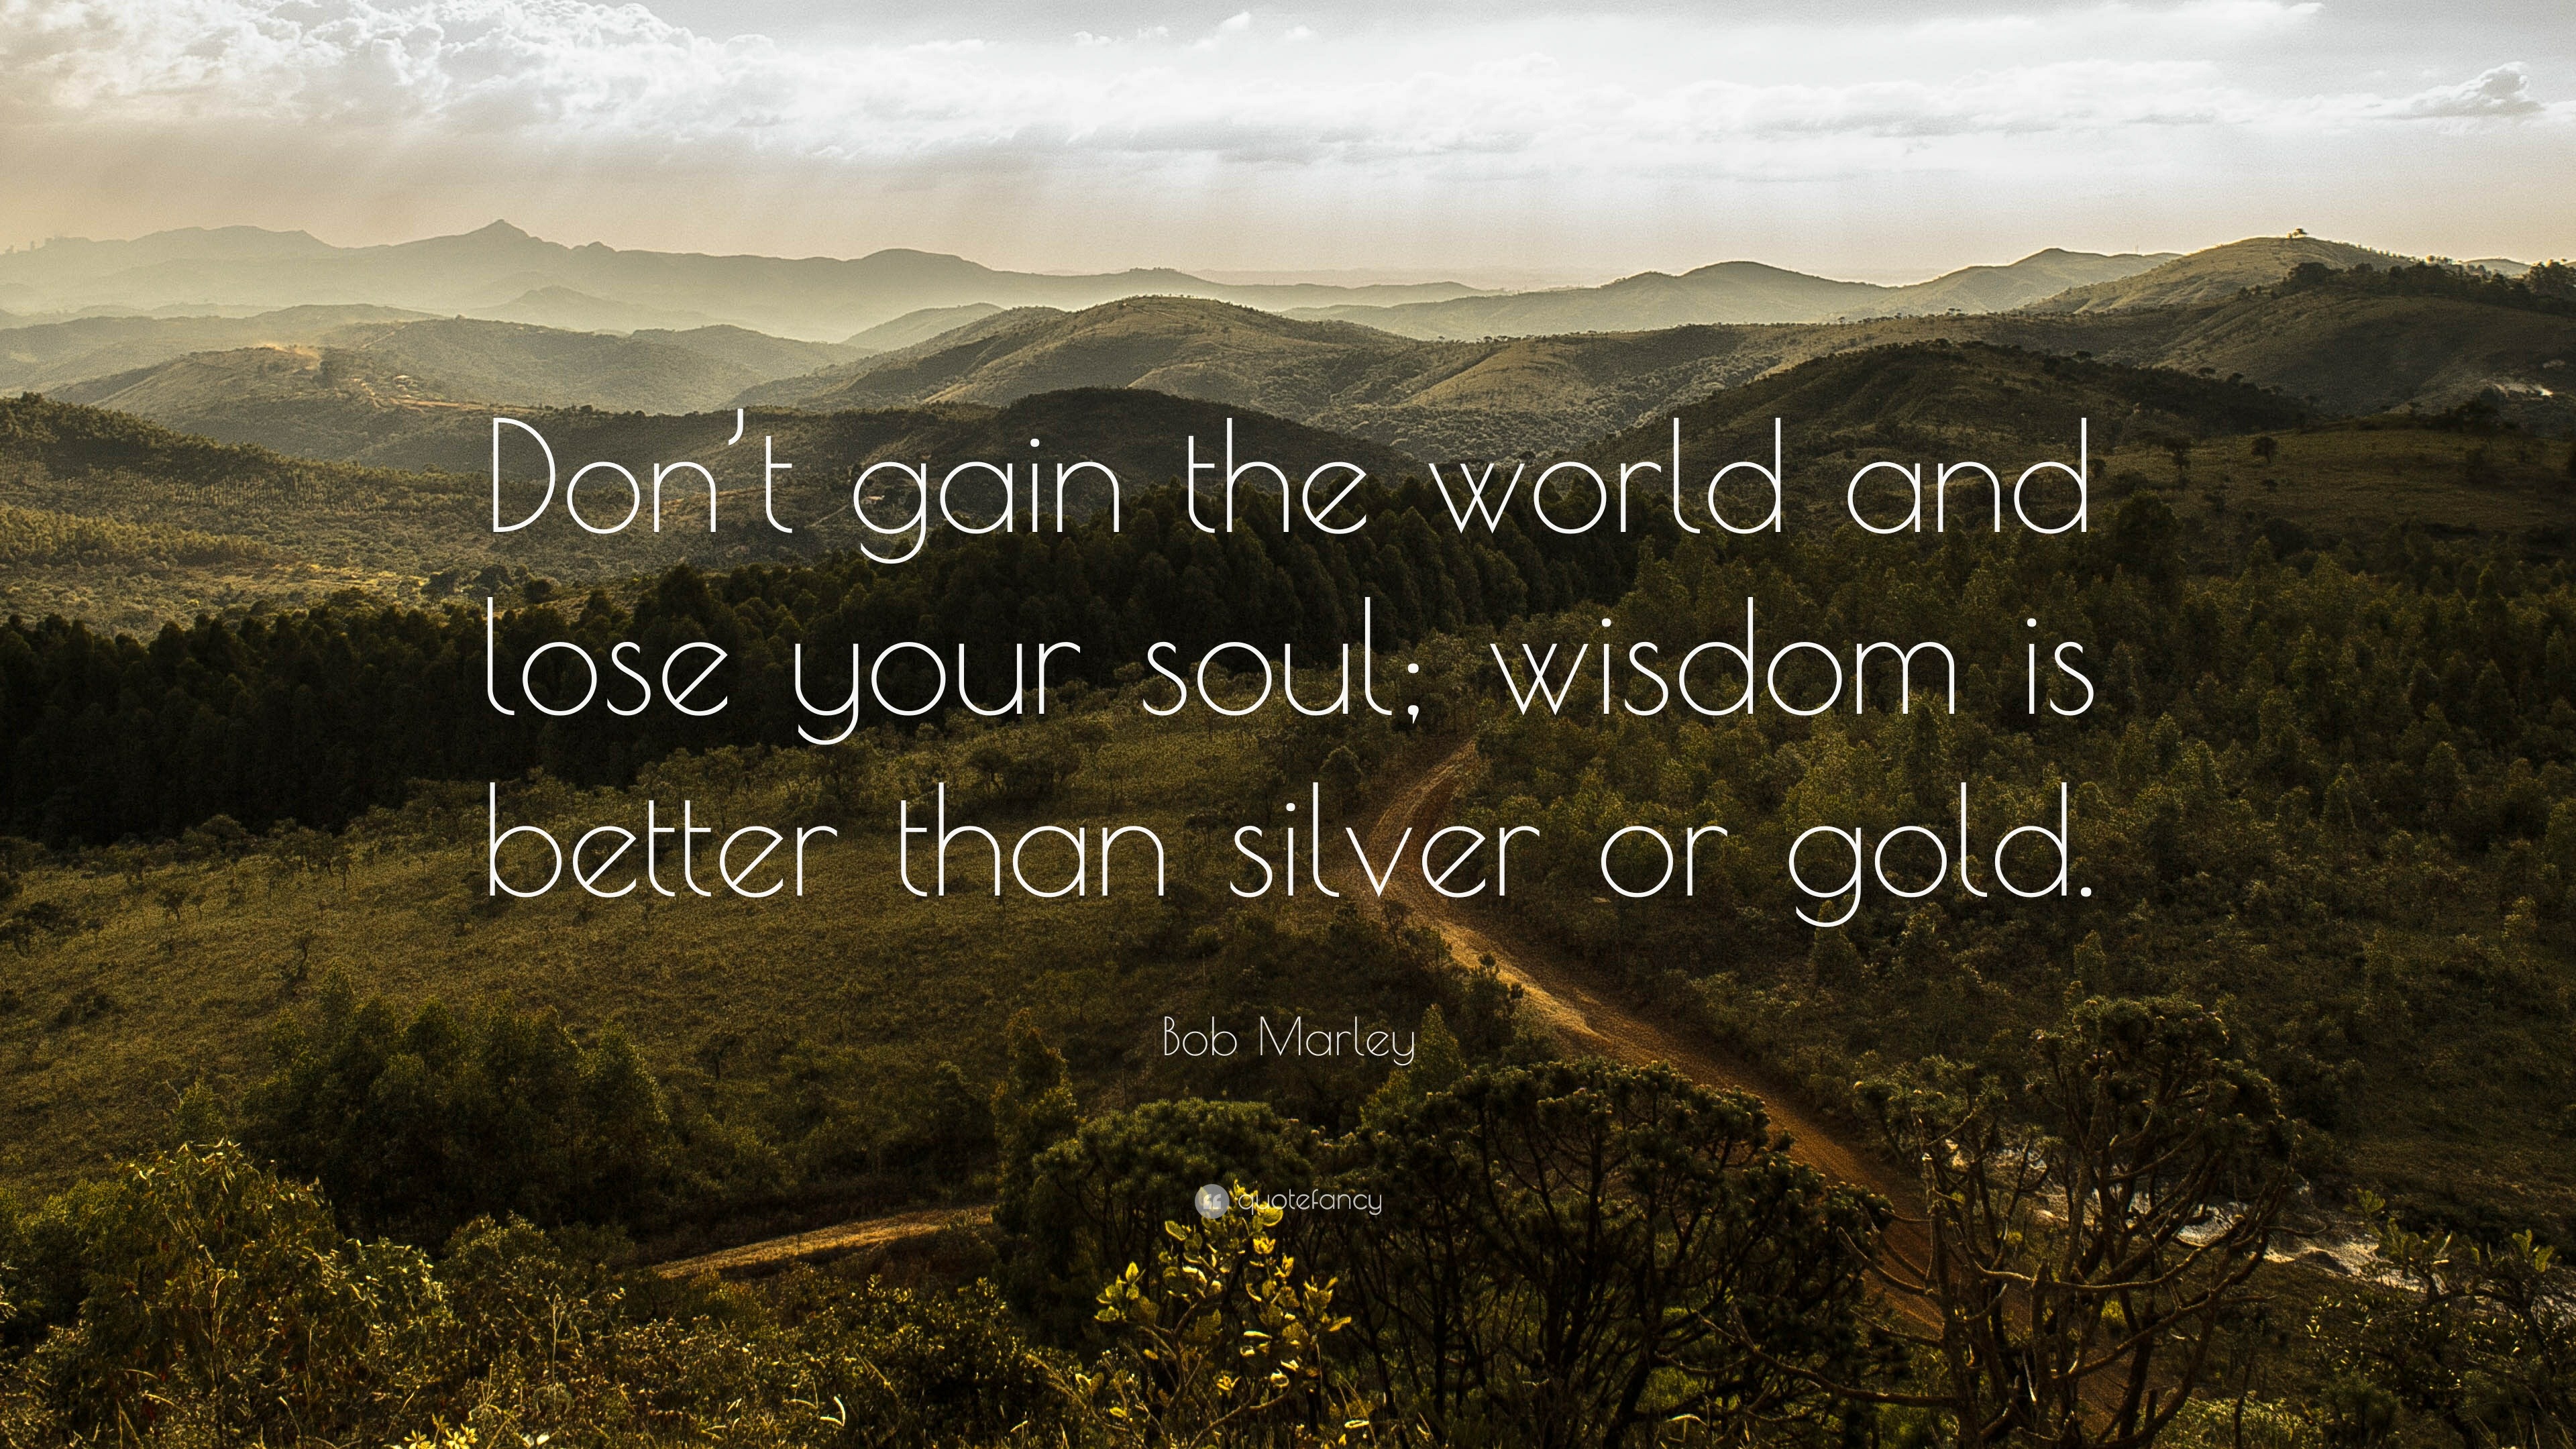 https://quotefancy.com/media/wallpaper/3840x2160/2487-Bob-Marley-Quote-Don-t-gain-the-world-and-lose-your-soul-wisdom-is.jpg